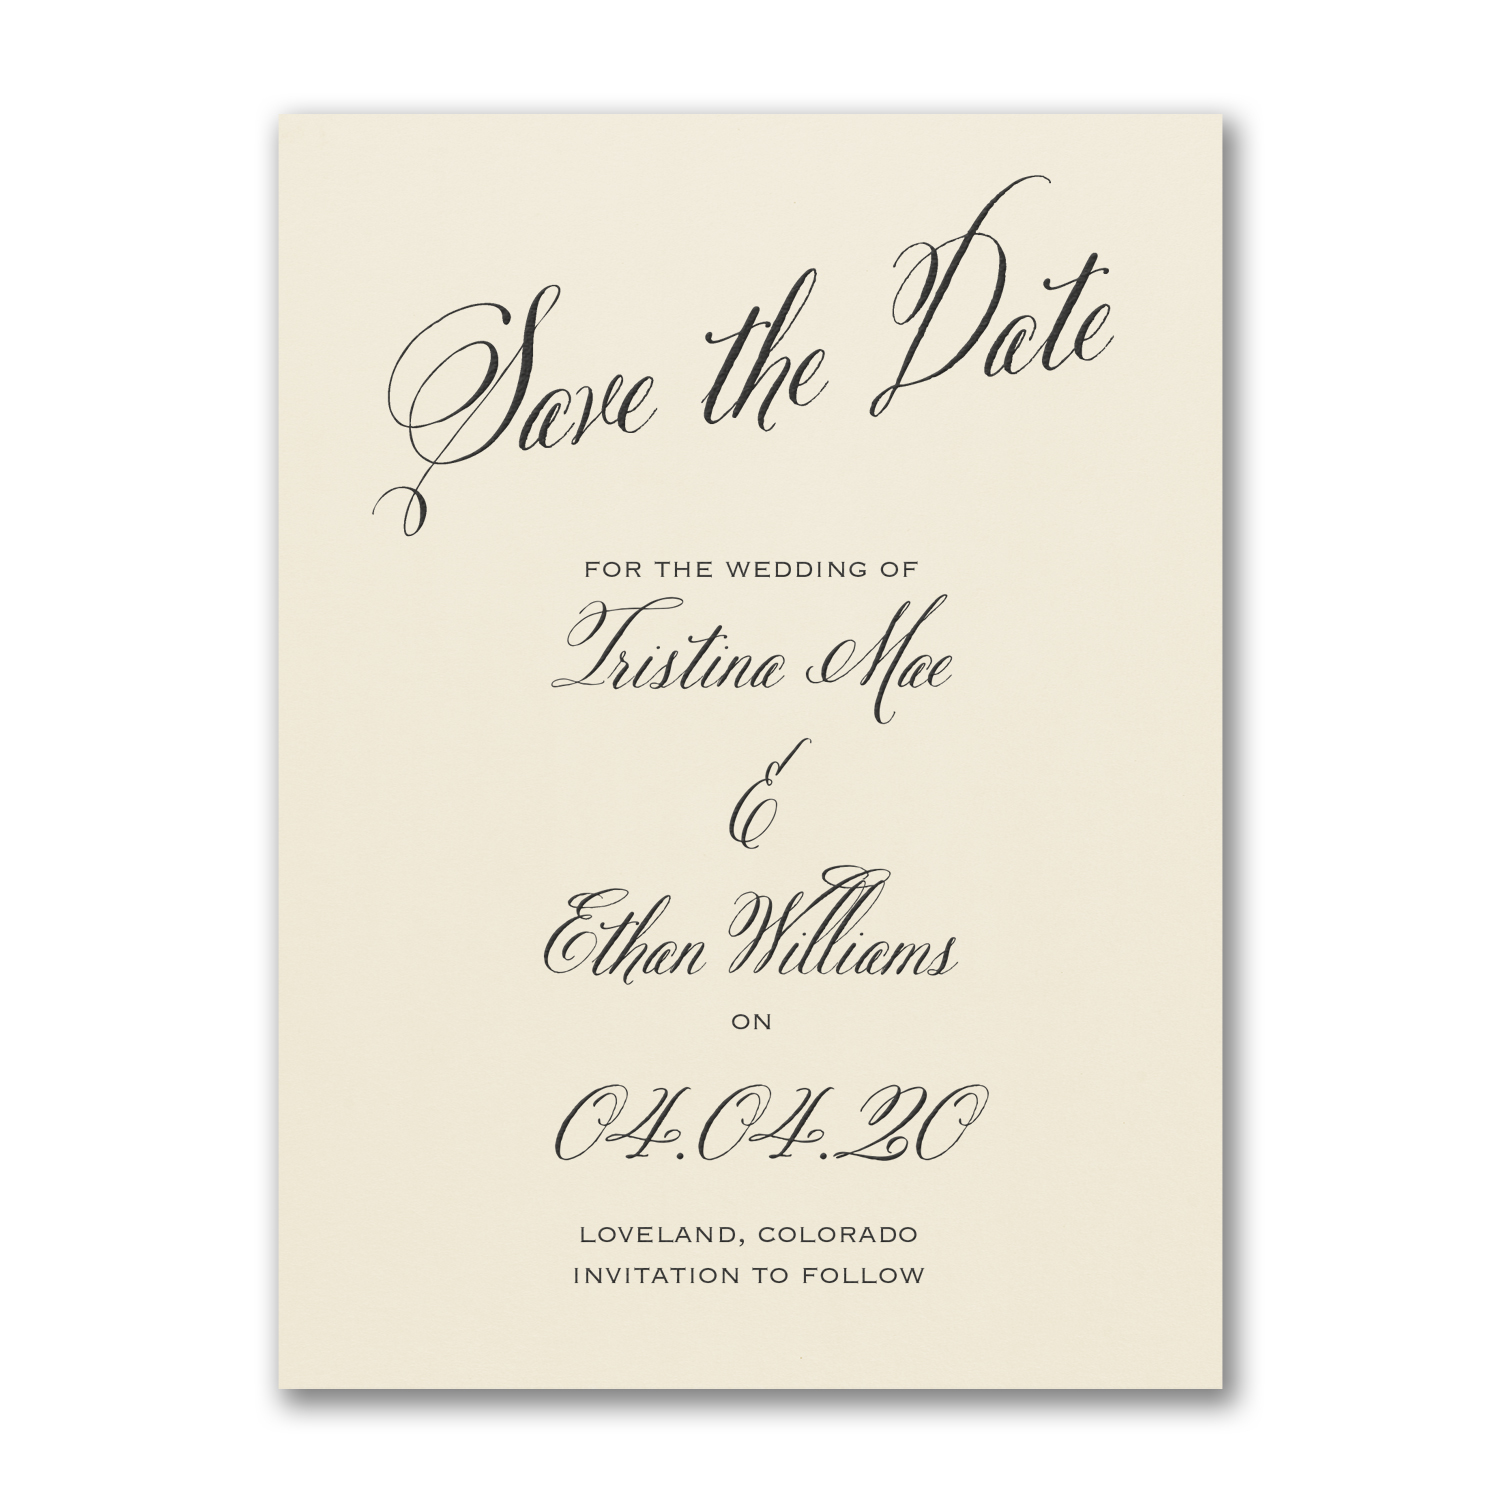 delightful date save the date card carlson craft